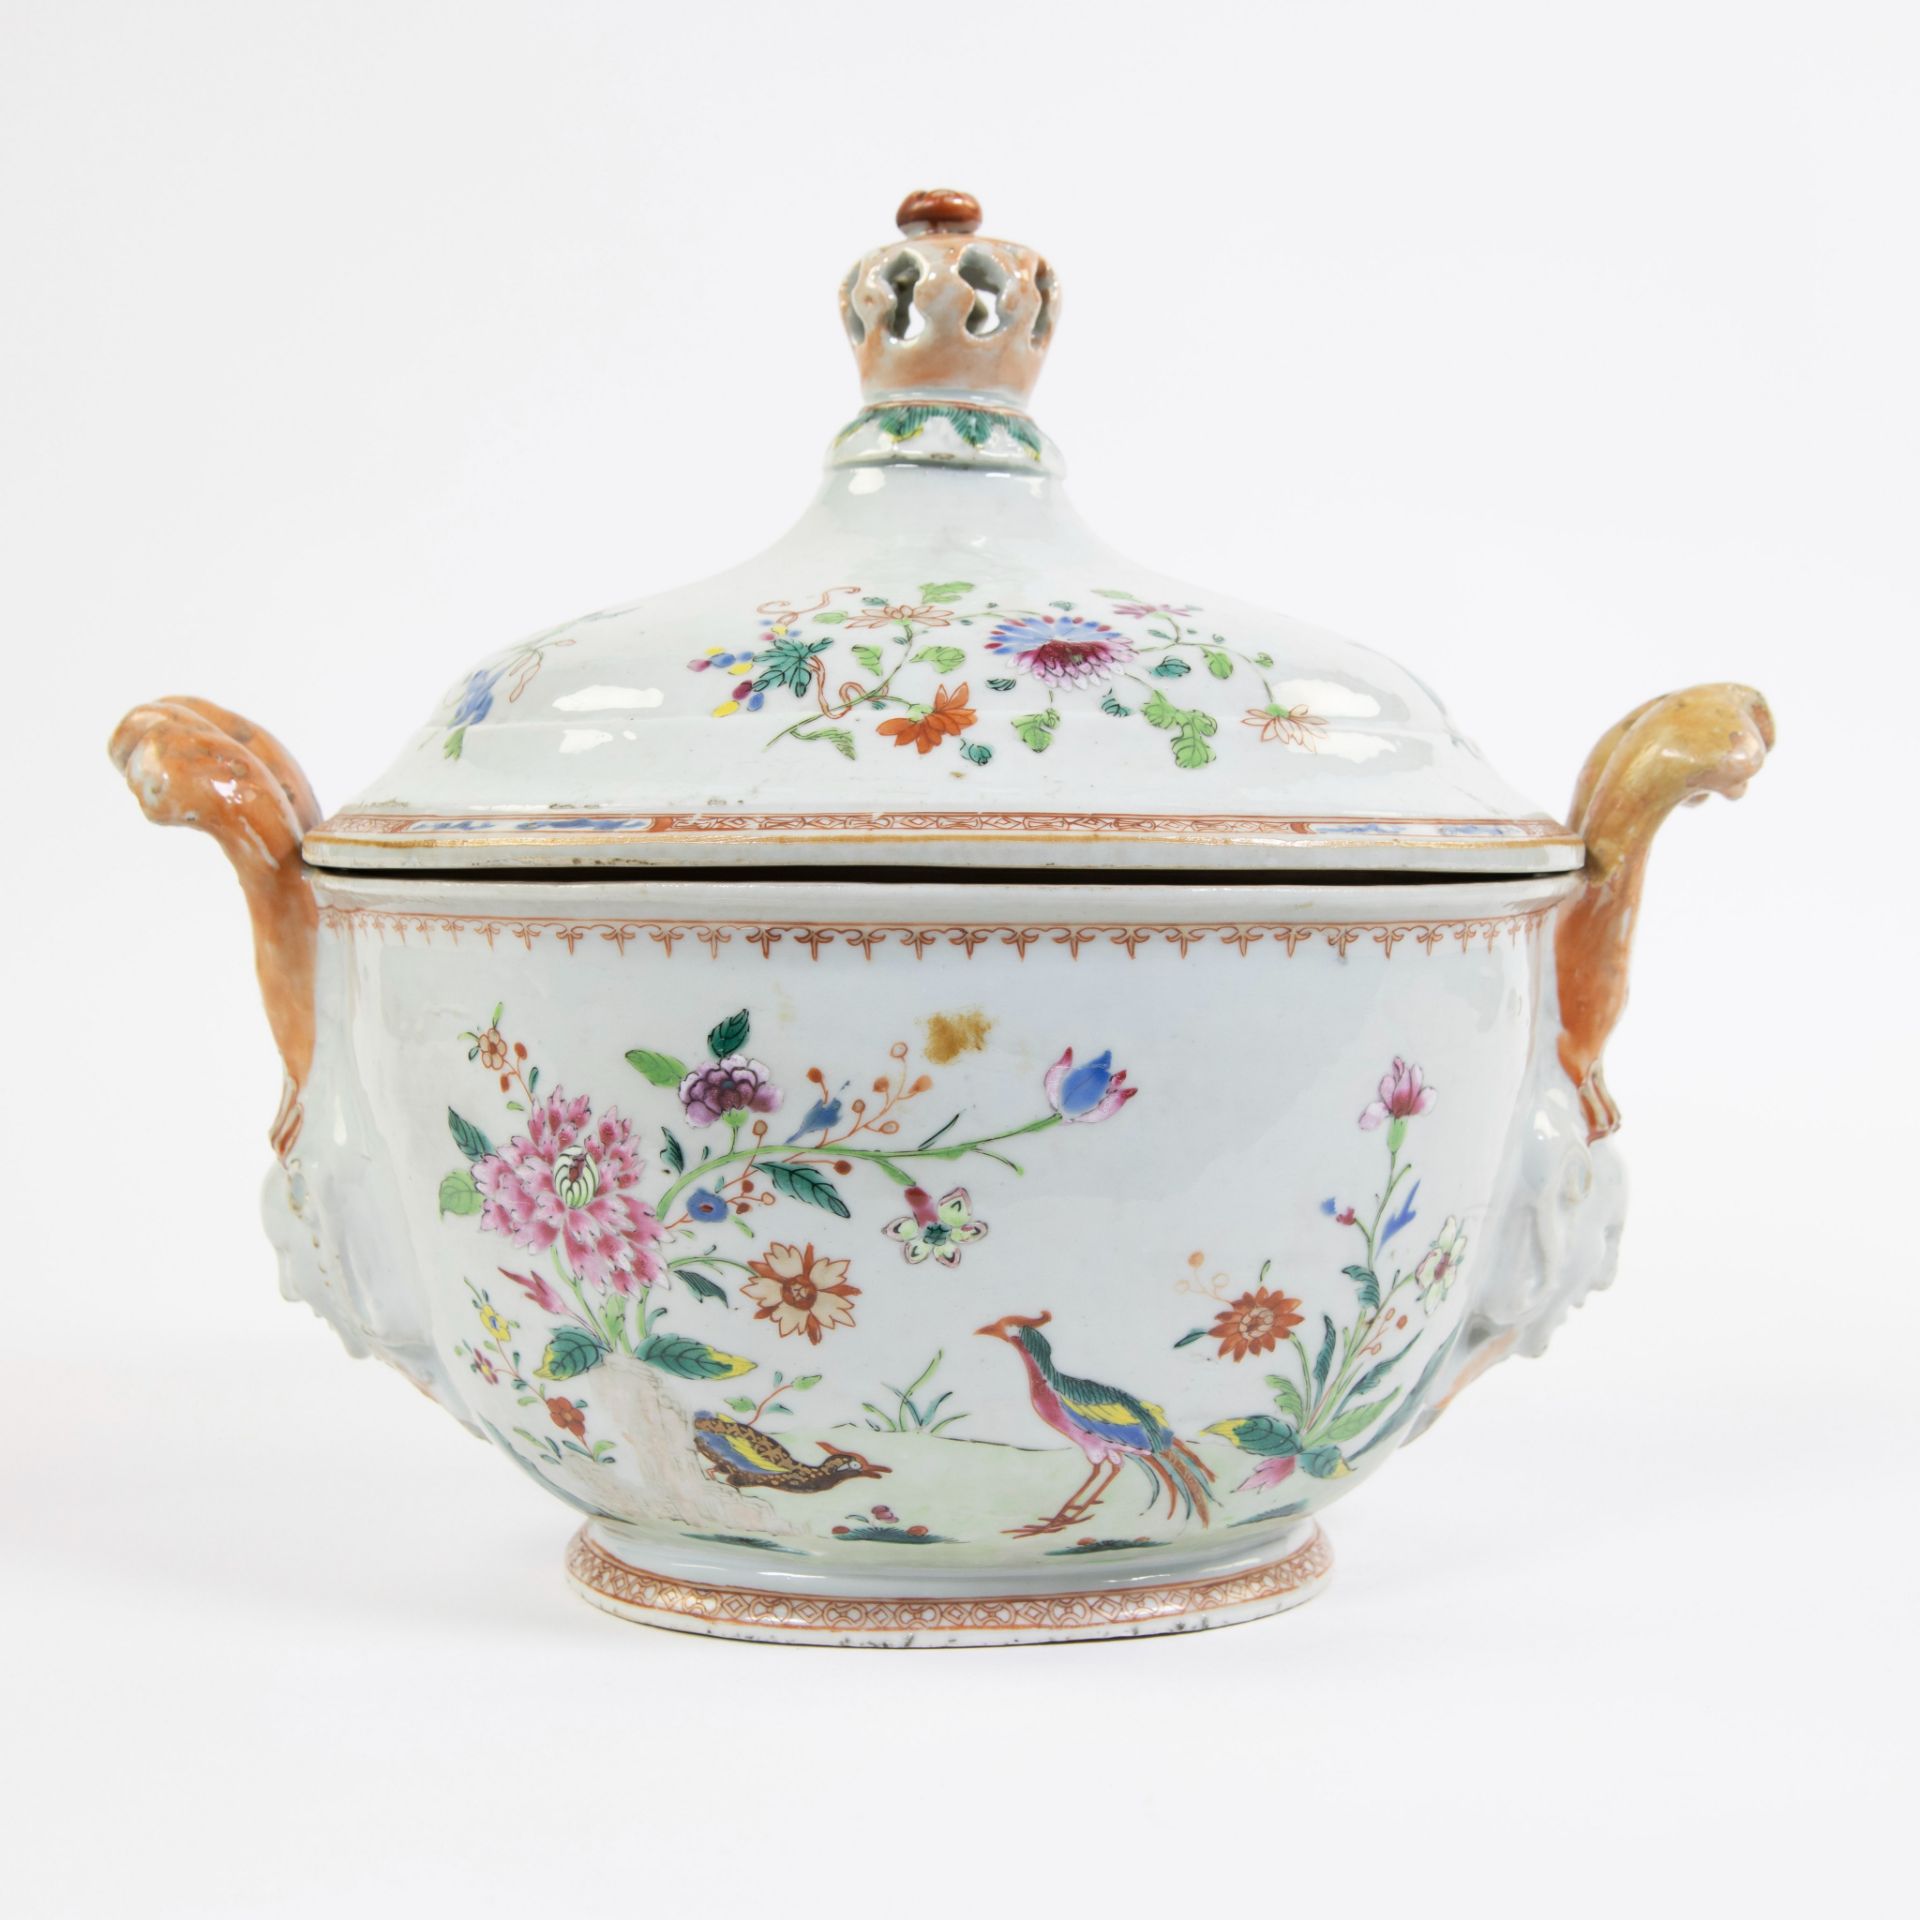 Chinese famille rose tureen and cover decorated with flowers and birds, 18th century - Image 2 of 9